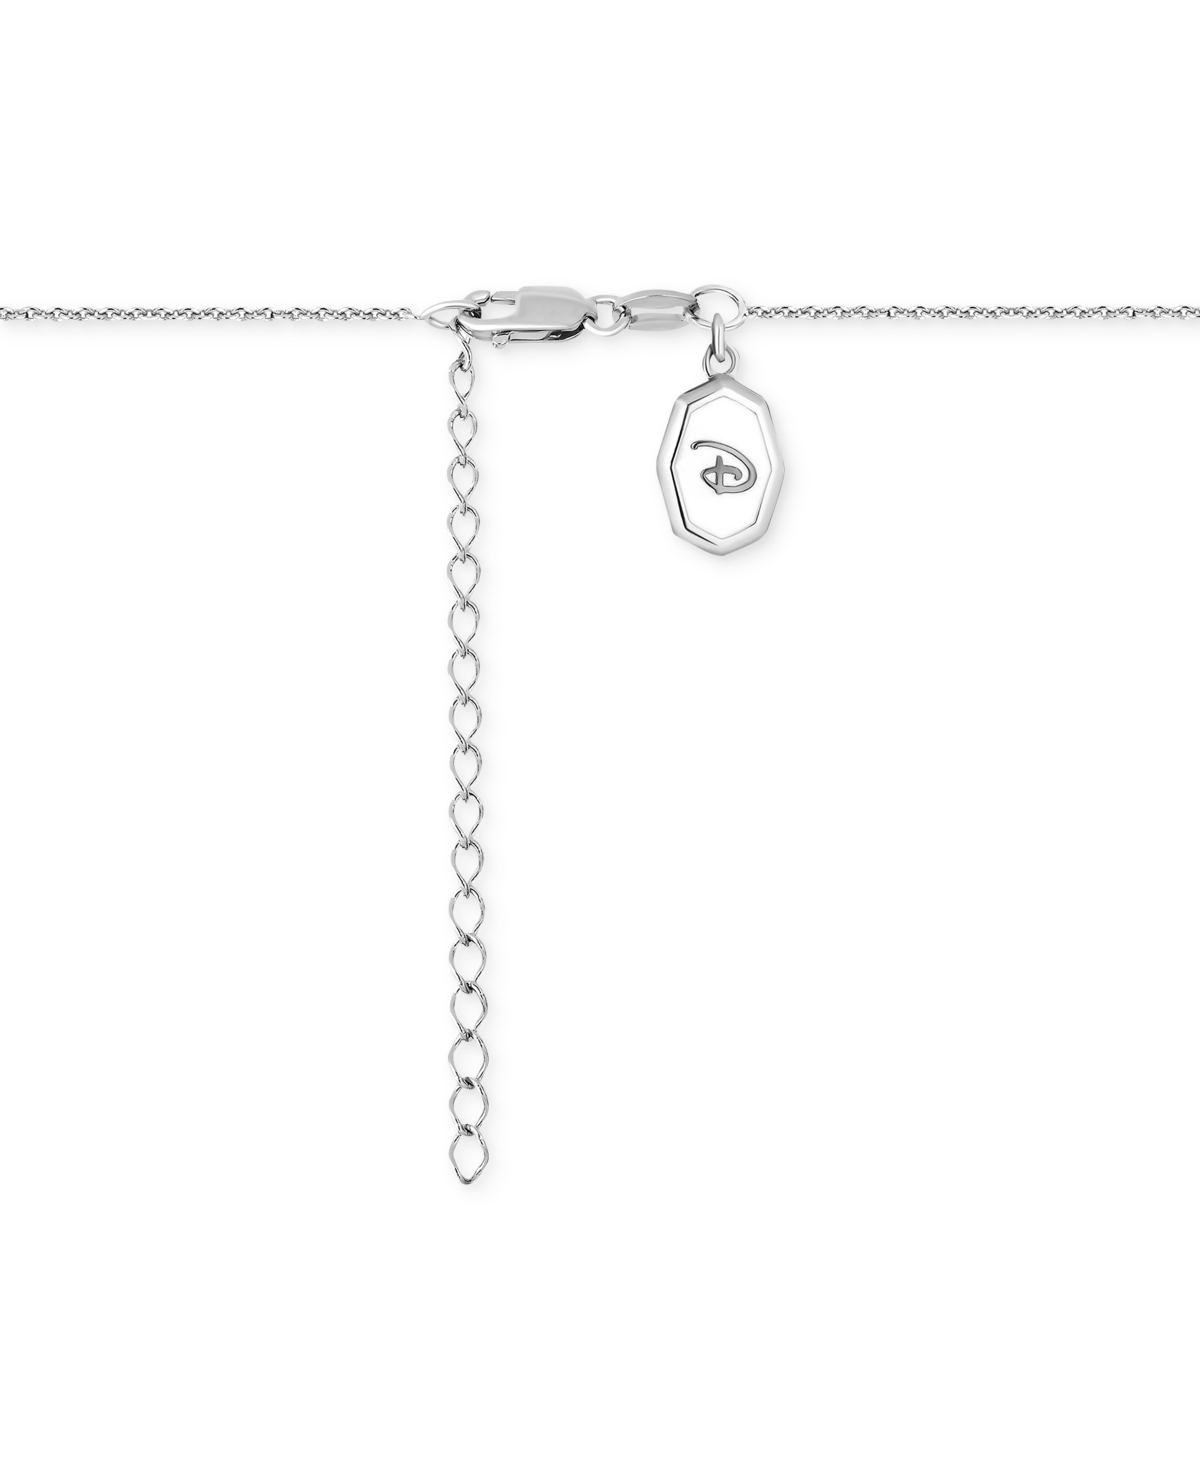 Shop Wonder Fine Jewelry Diamond Mickey Mouse Dangle Collar Necklace (1/5 Ct. T.w.) In Sterling Silver, 16" + 2" Extender